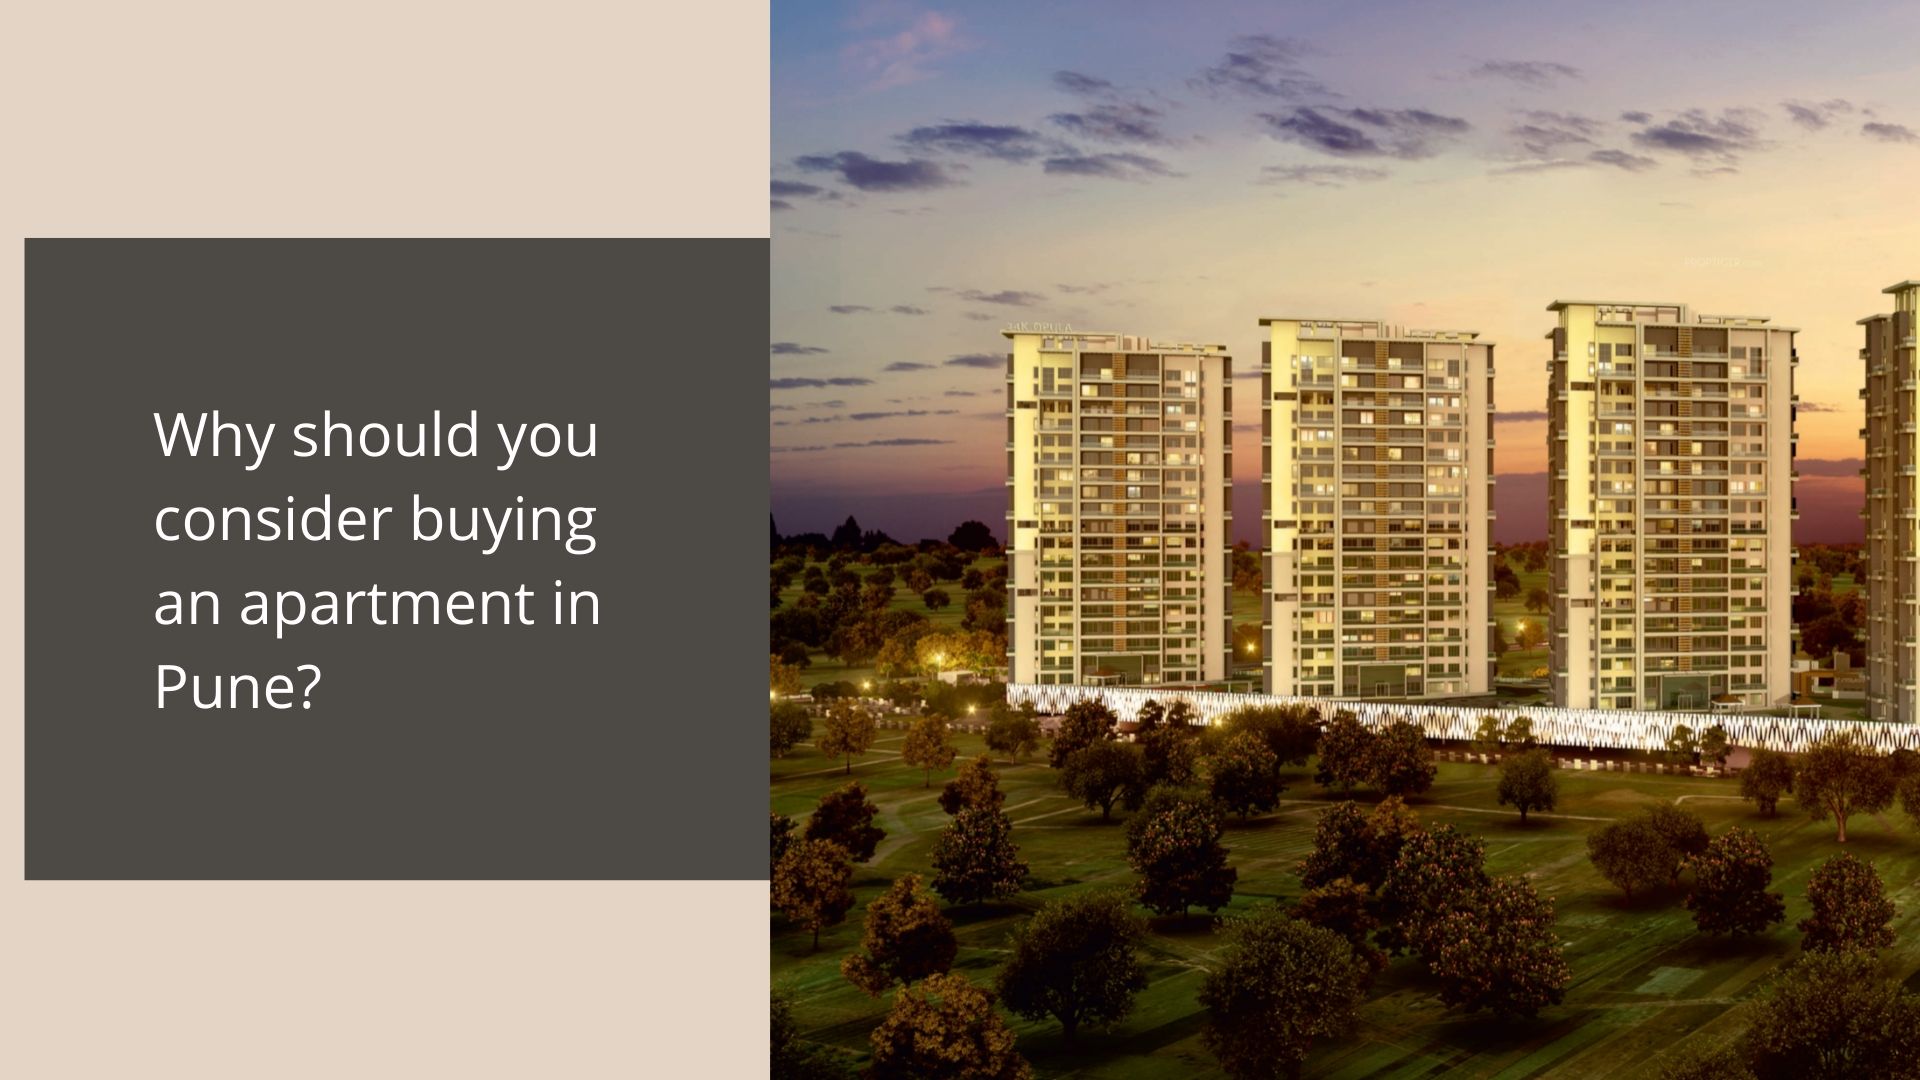 Why should you consider buying an apartment in Pune?